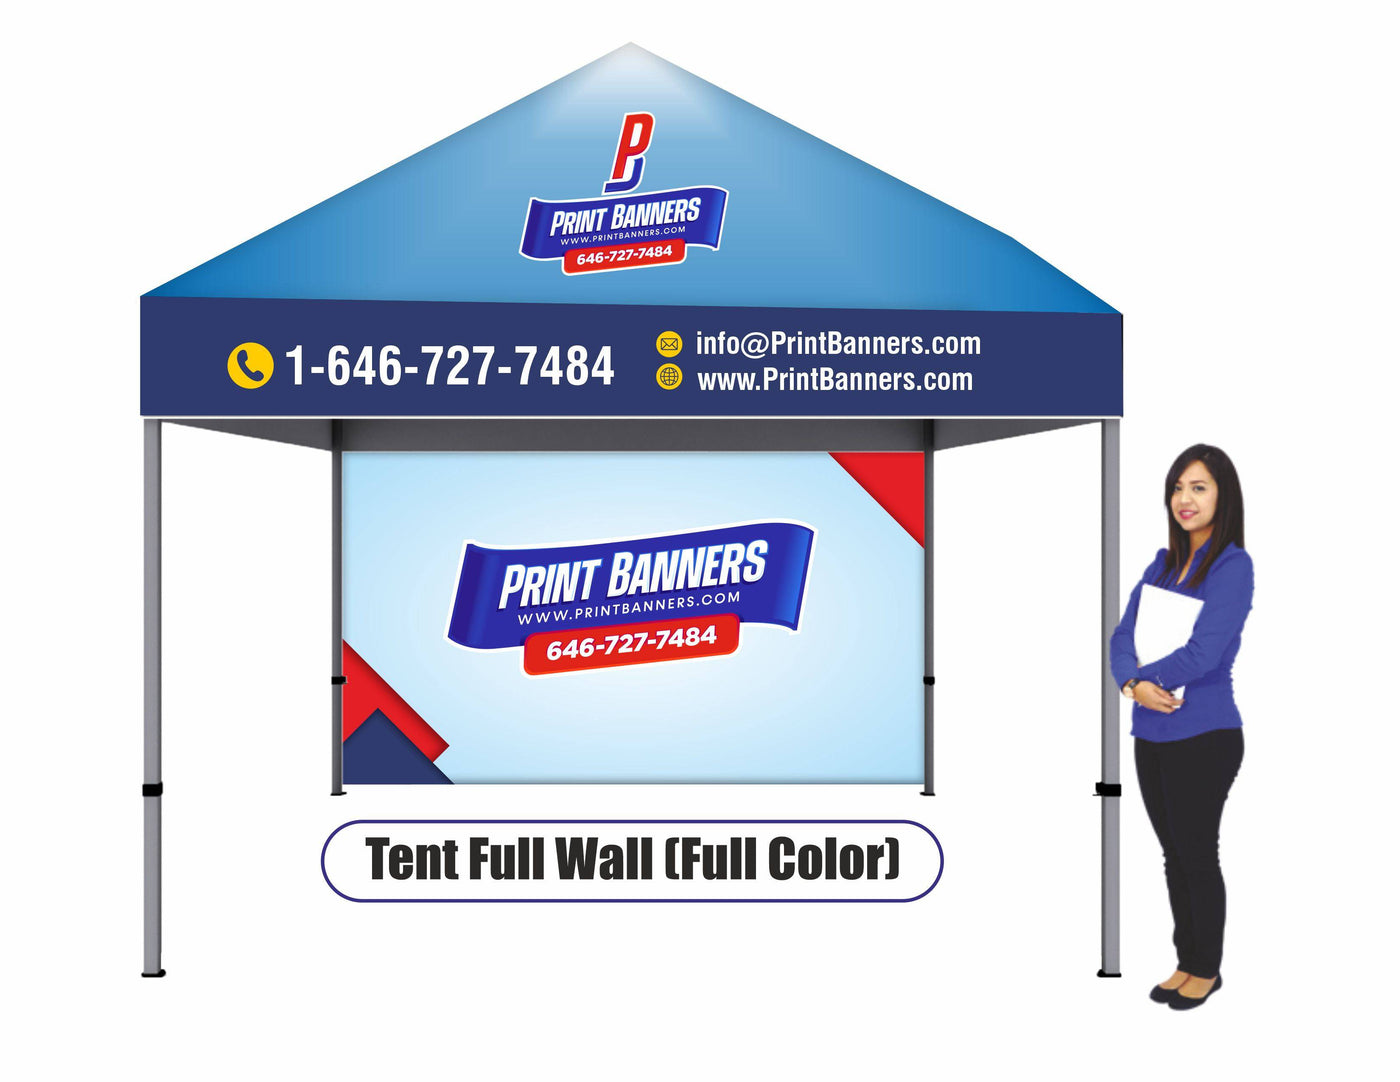 Tent Full Wall (Full Color) - Print Banners NYC